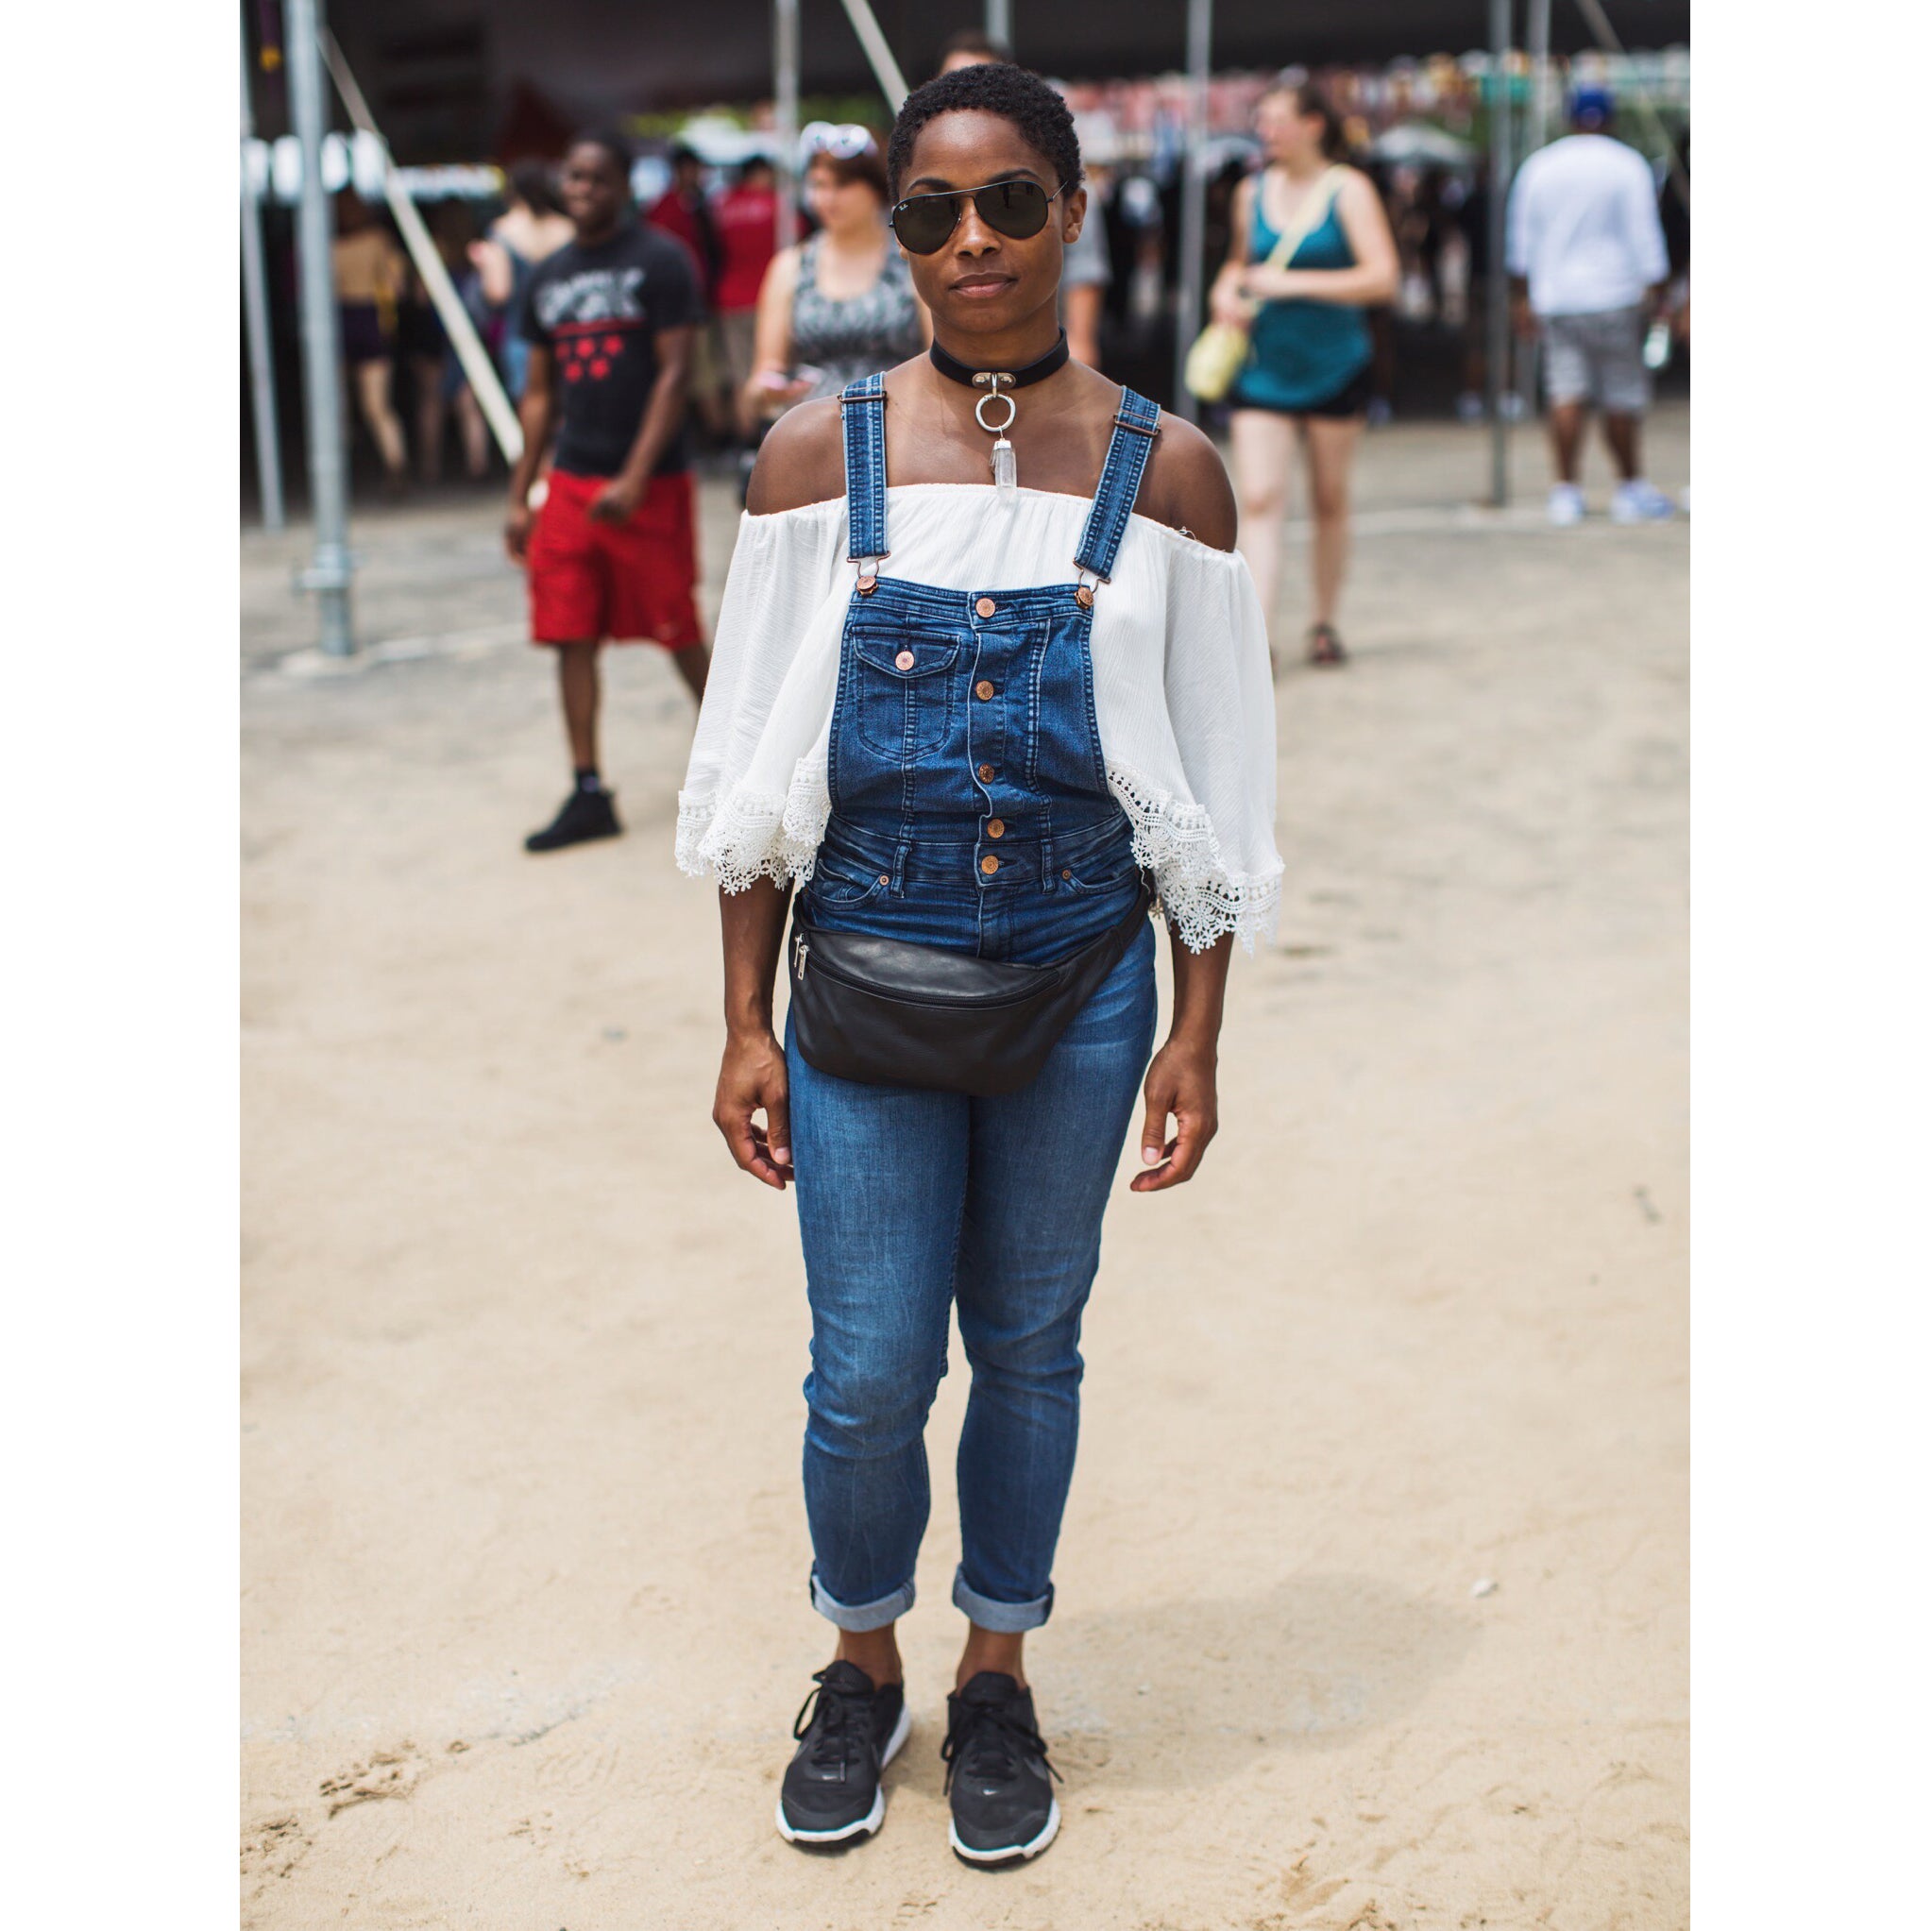 The Flyest Looks from The 2016 Roots Picnic
